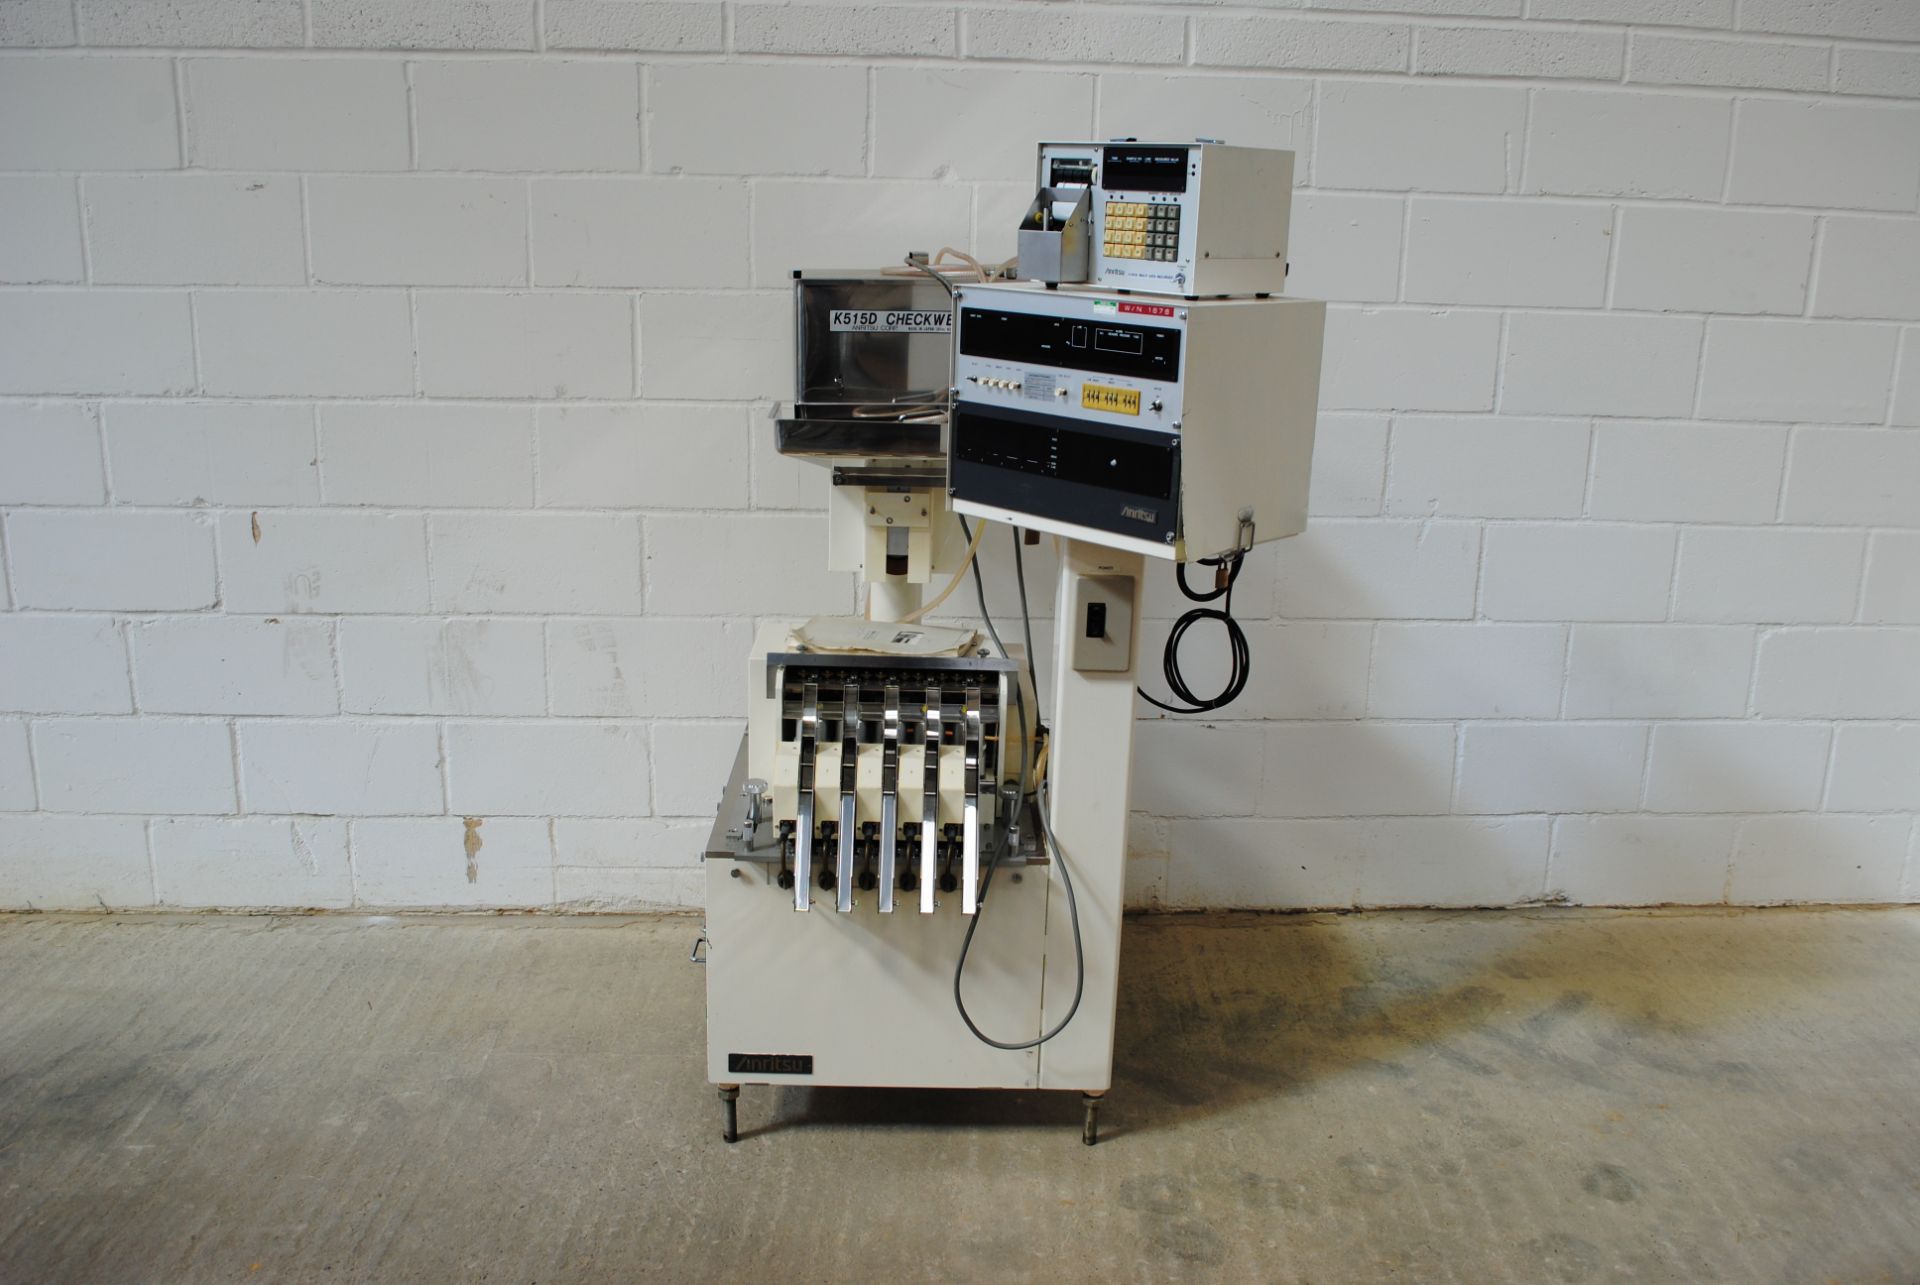 Aniritsu Capsule / Tablet Checkweigher Model: K51 5D with K261d Data Recorder S/N:A306 Year: 21/2/